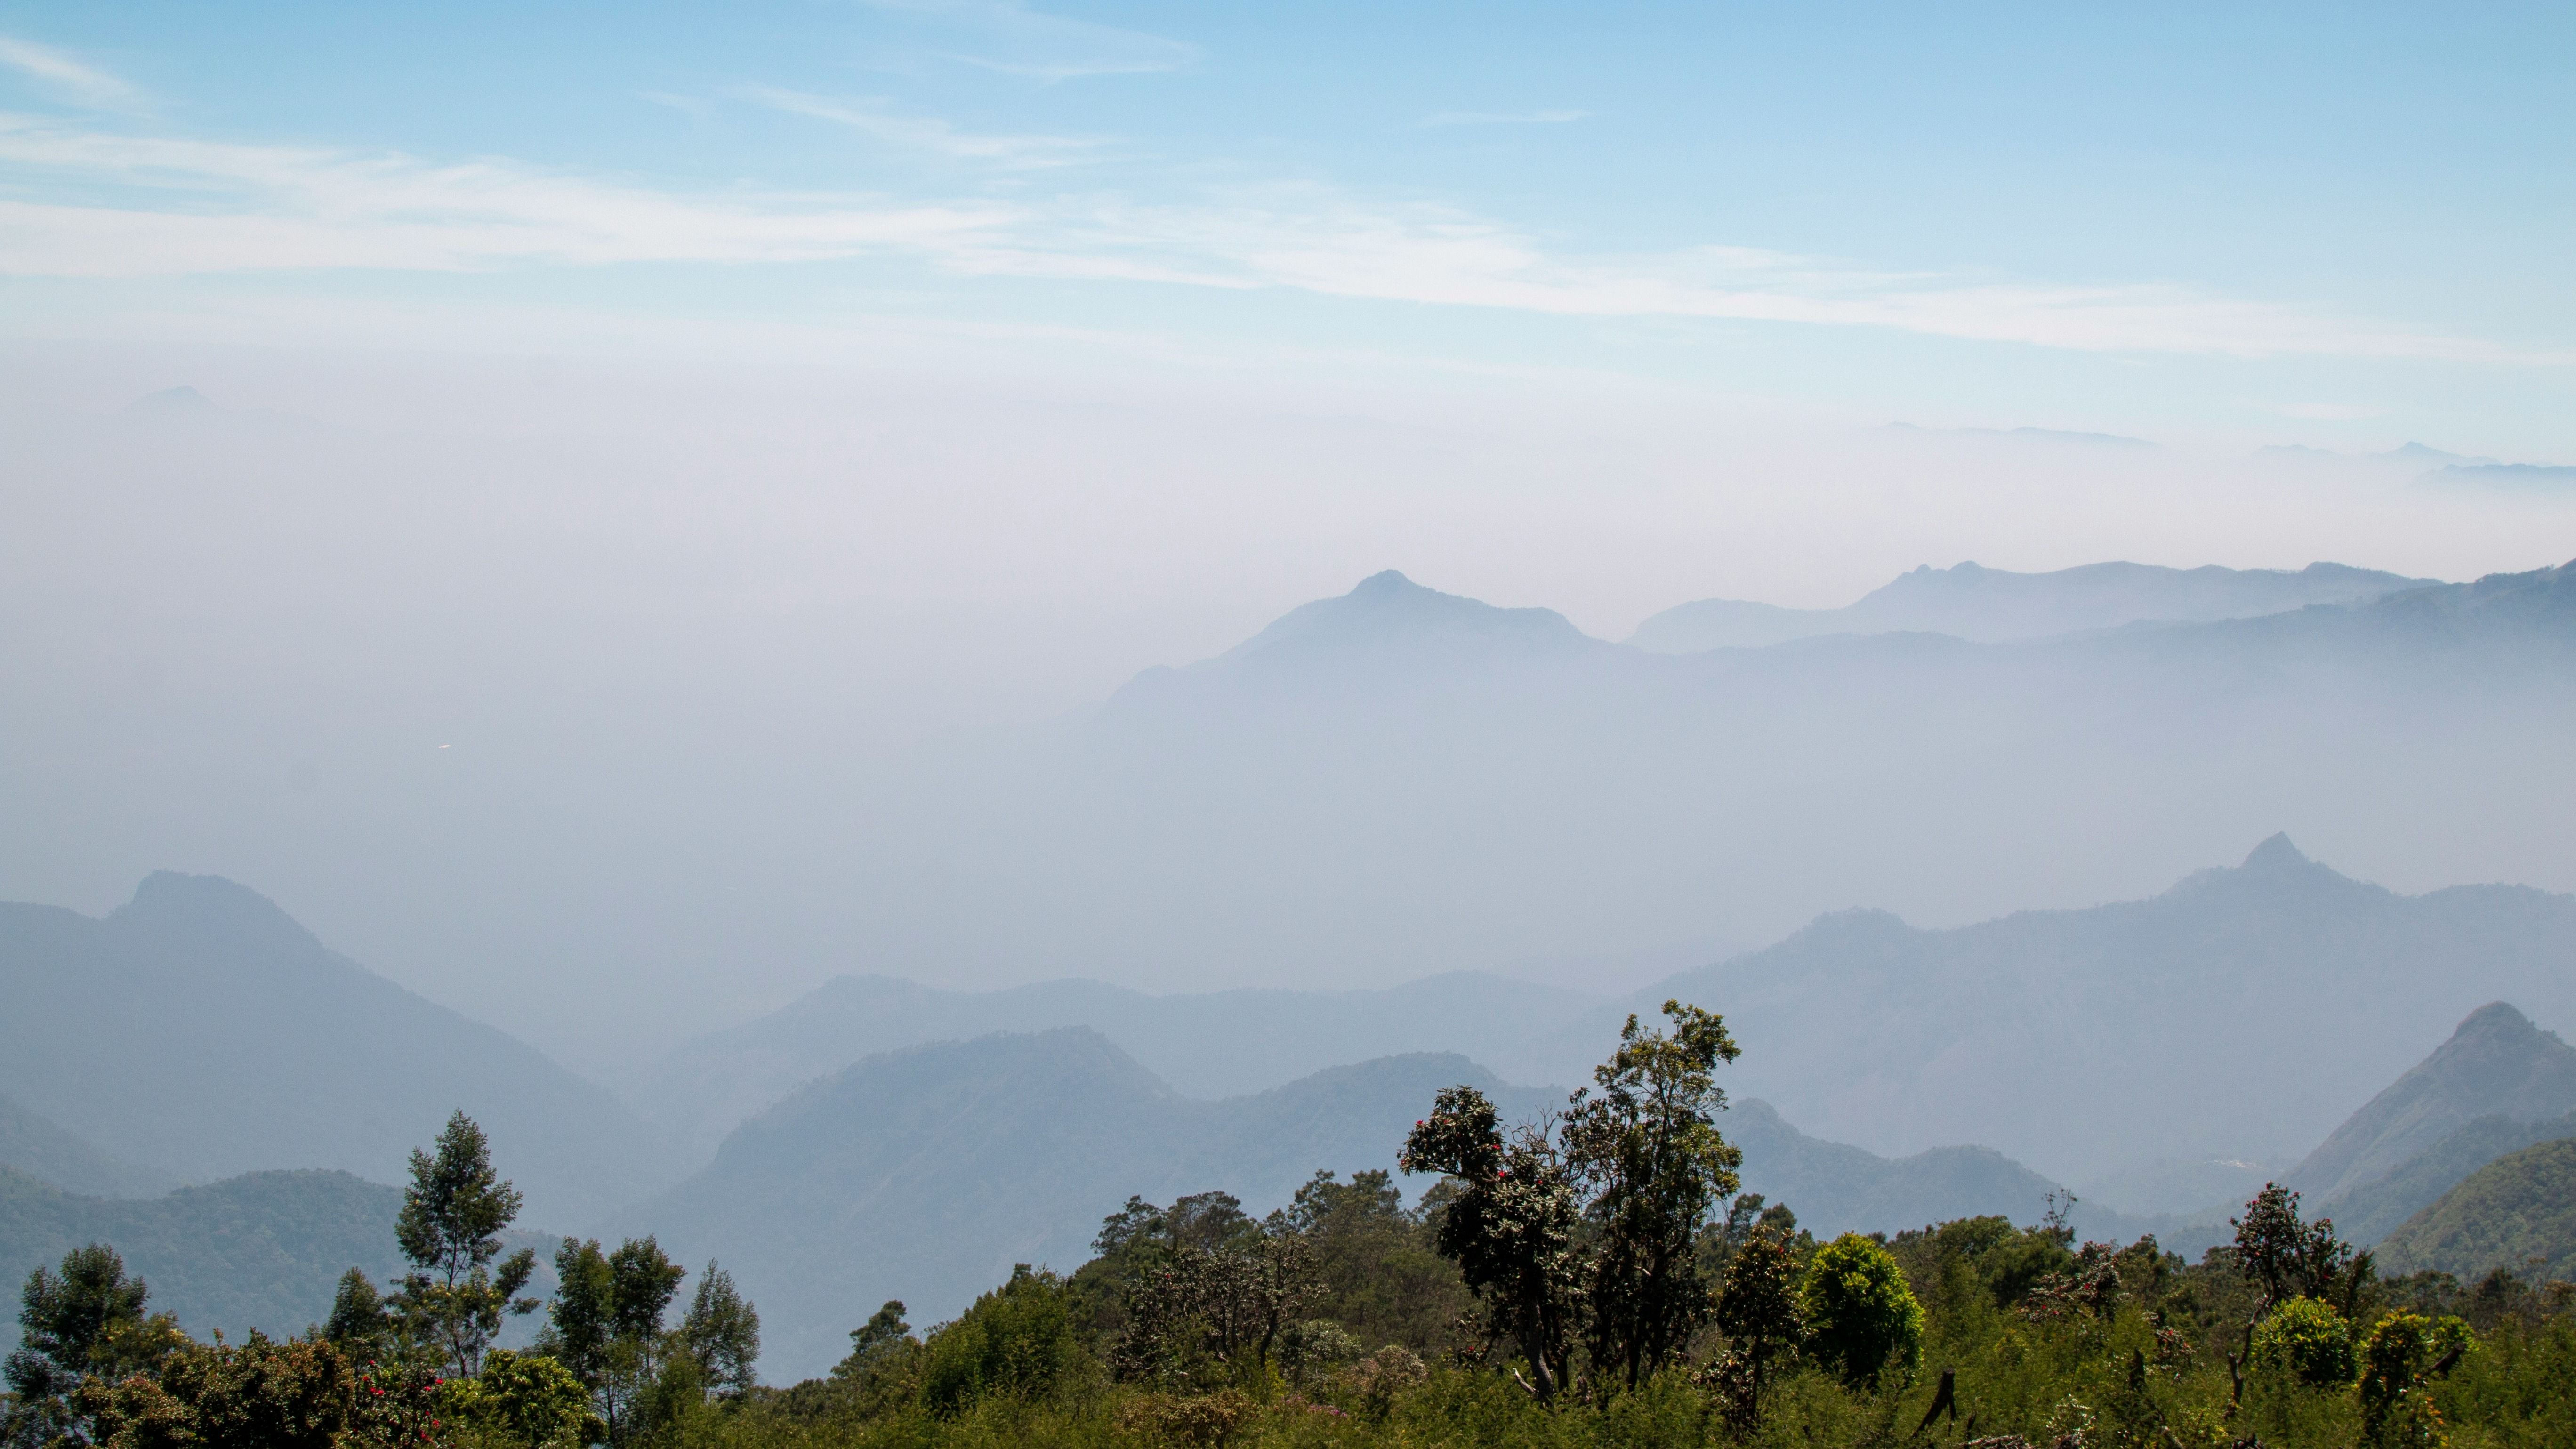 Situated in the Shevaroy Hills of Tamil Nadu, Yercaud is a tranquil hill station known for its pleasant climate, aromatic coffee plantations, and scenic beauty. 